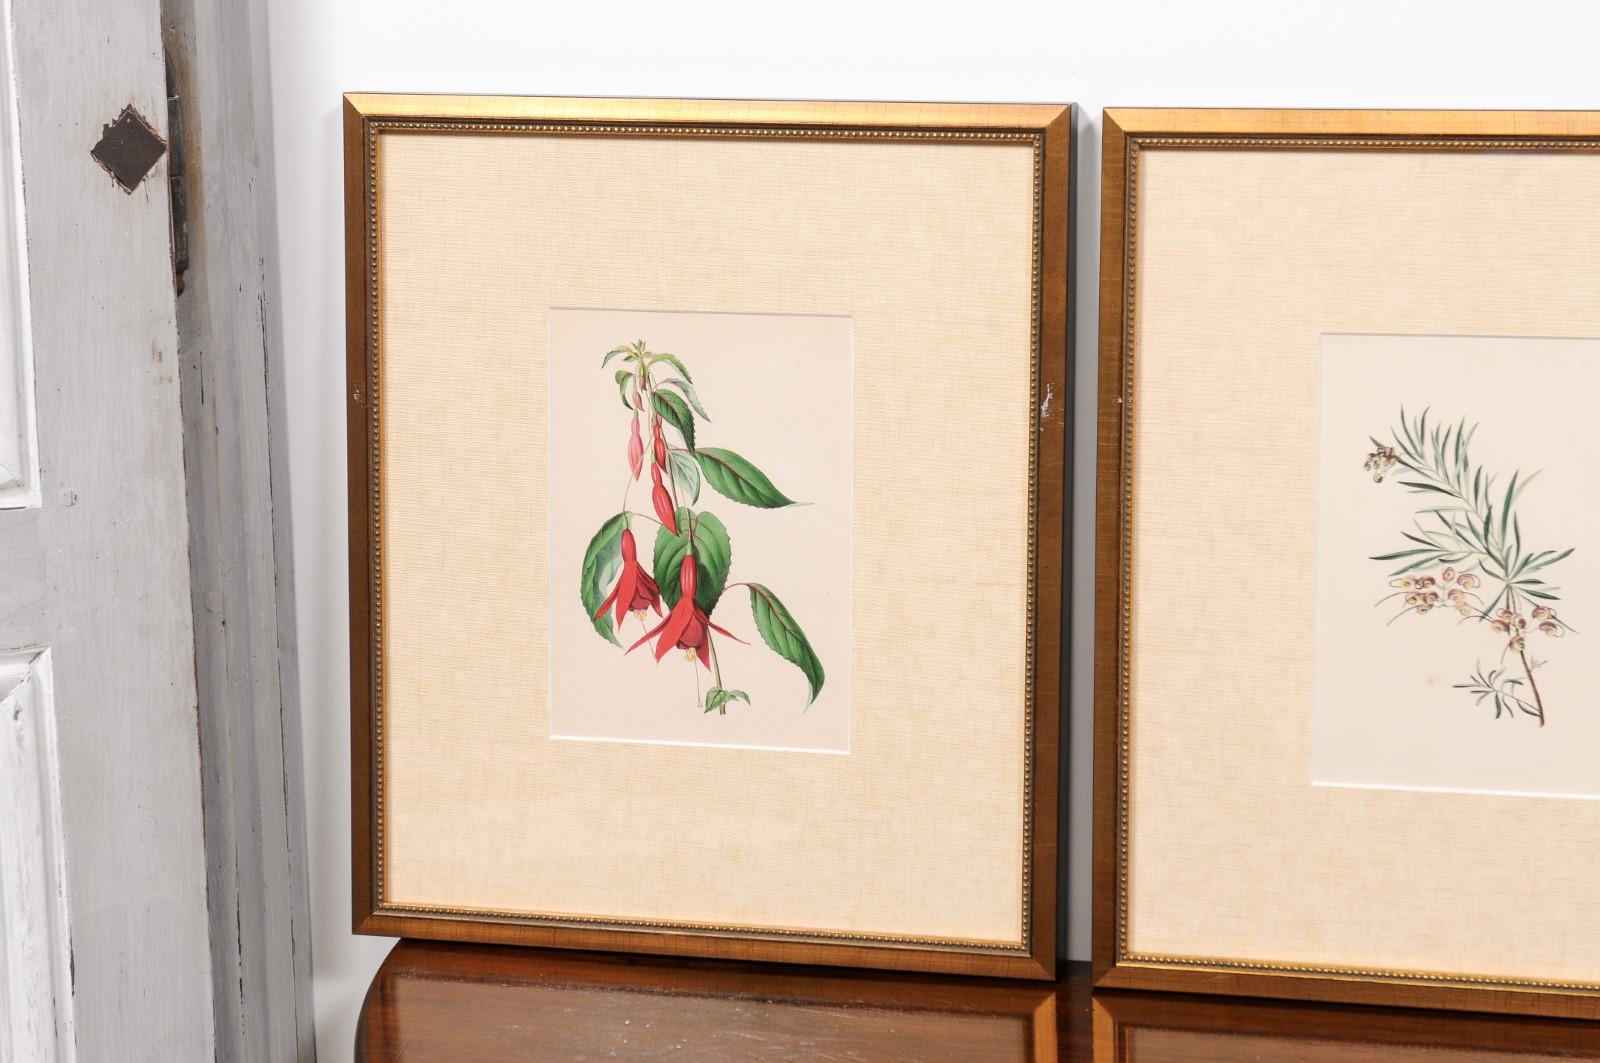  Victorian Floral Prints from The Museum of Flowers by Mary Elizabeth Rosenberg For Sale 5